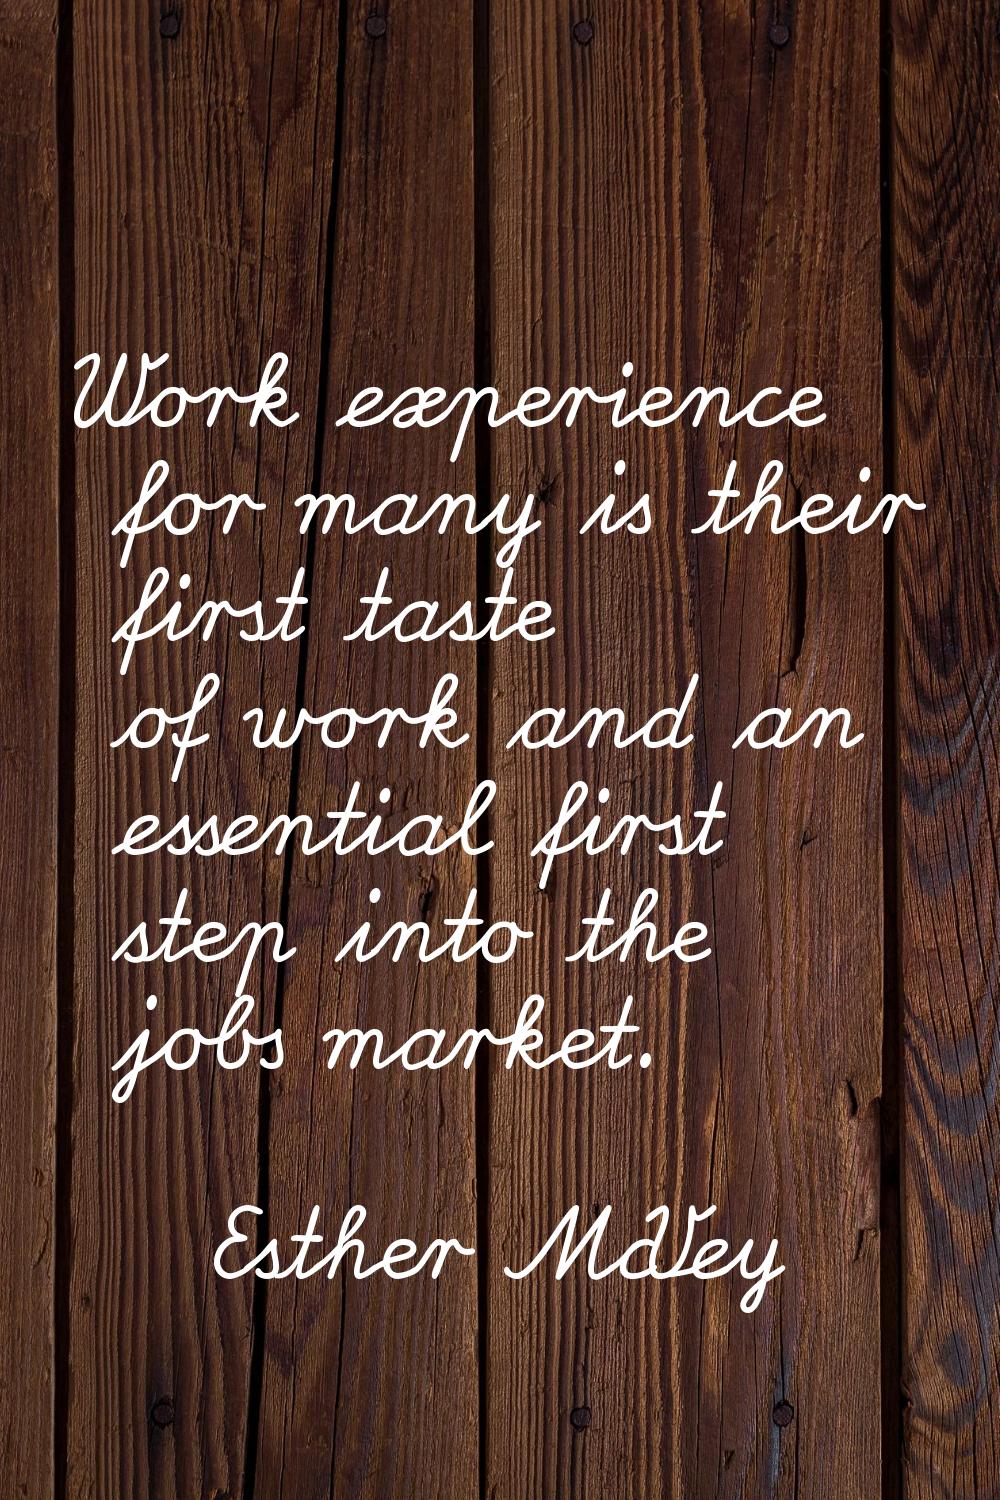 Work experience for many is their first taste of work and an essential first step into the jobs mar